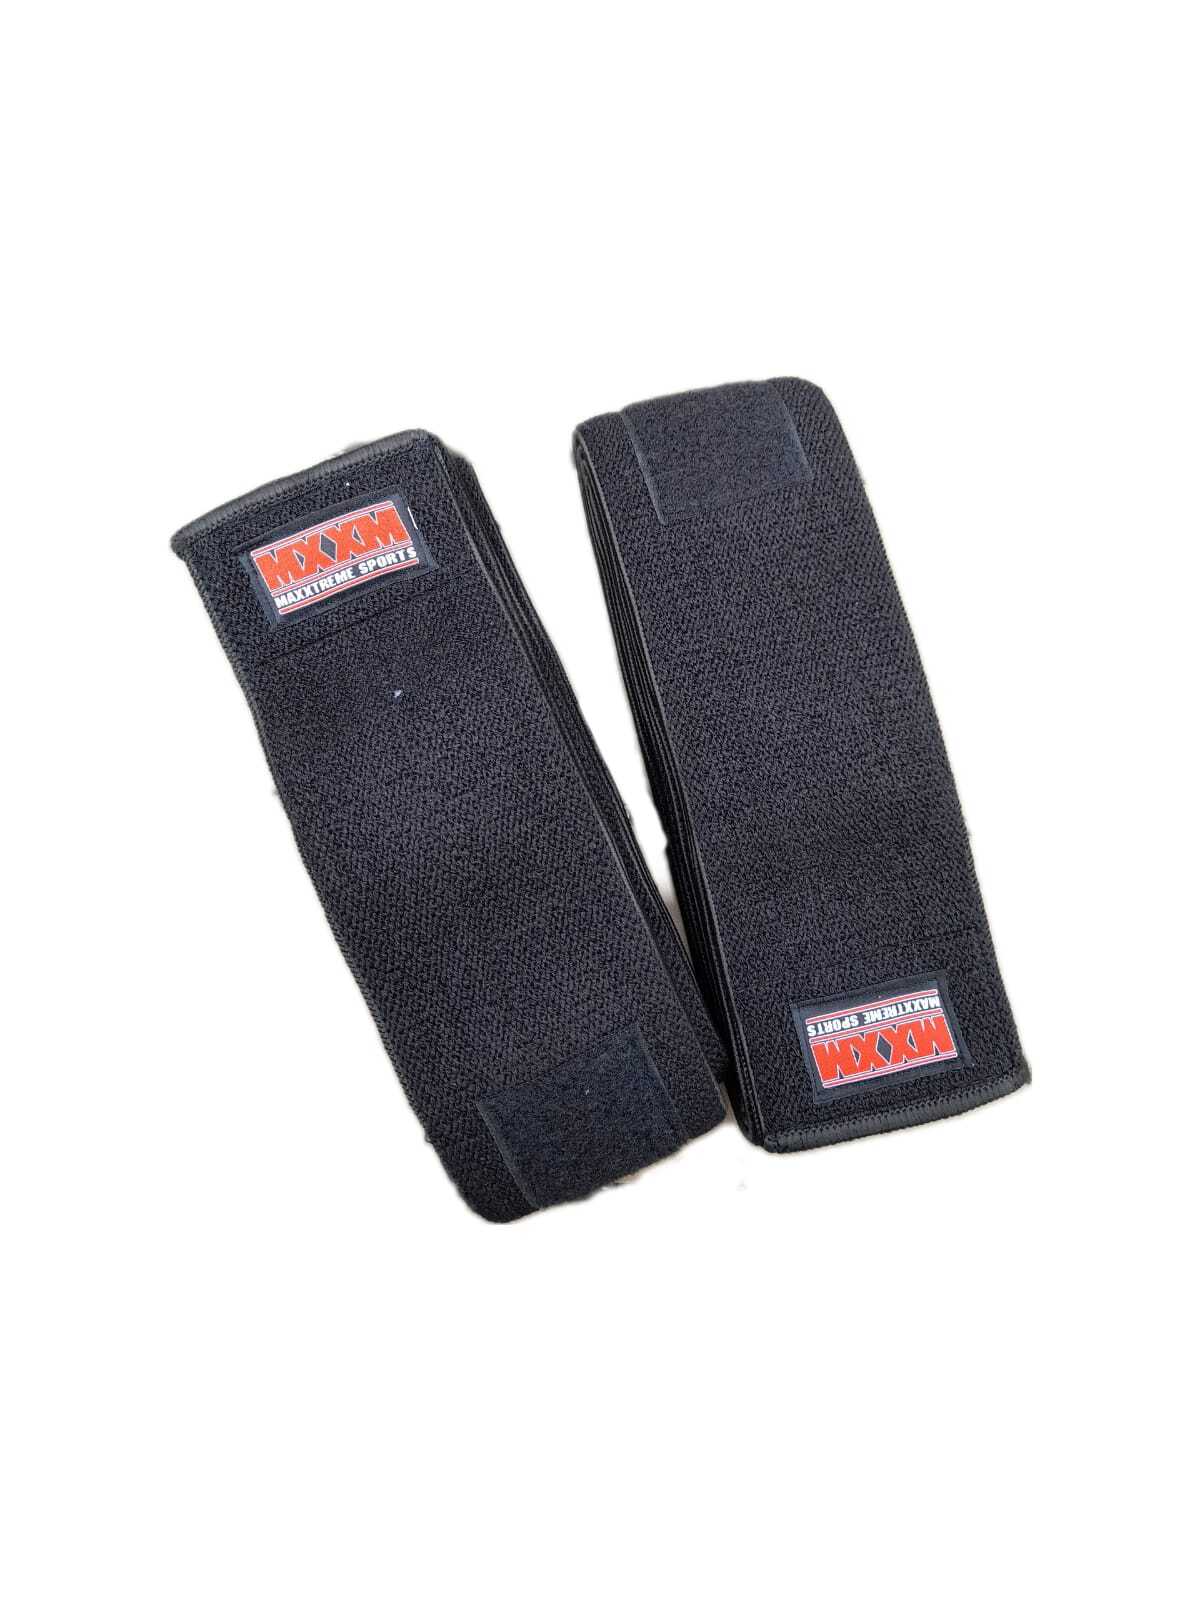 MAXXTREME POWER LIFTING /FITNESS KNEE SUPPORT PRO MODEL